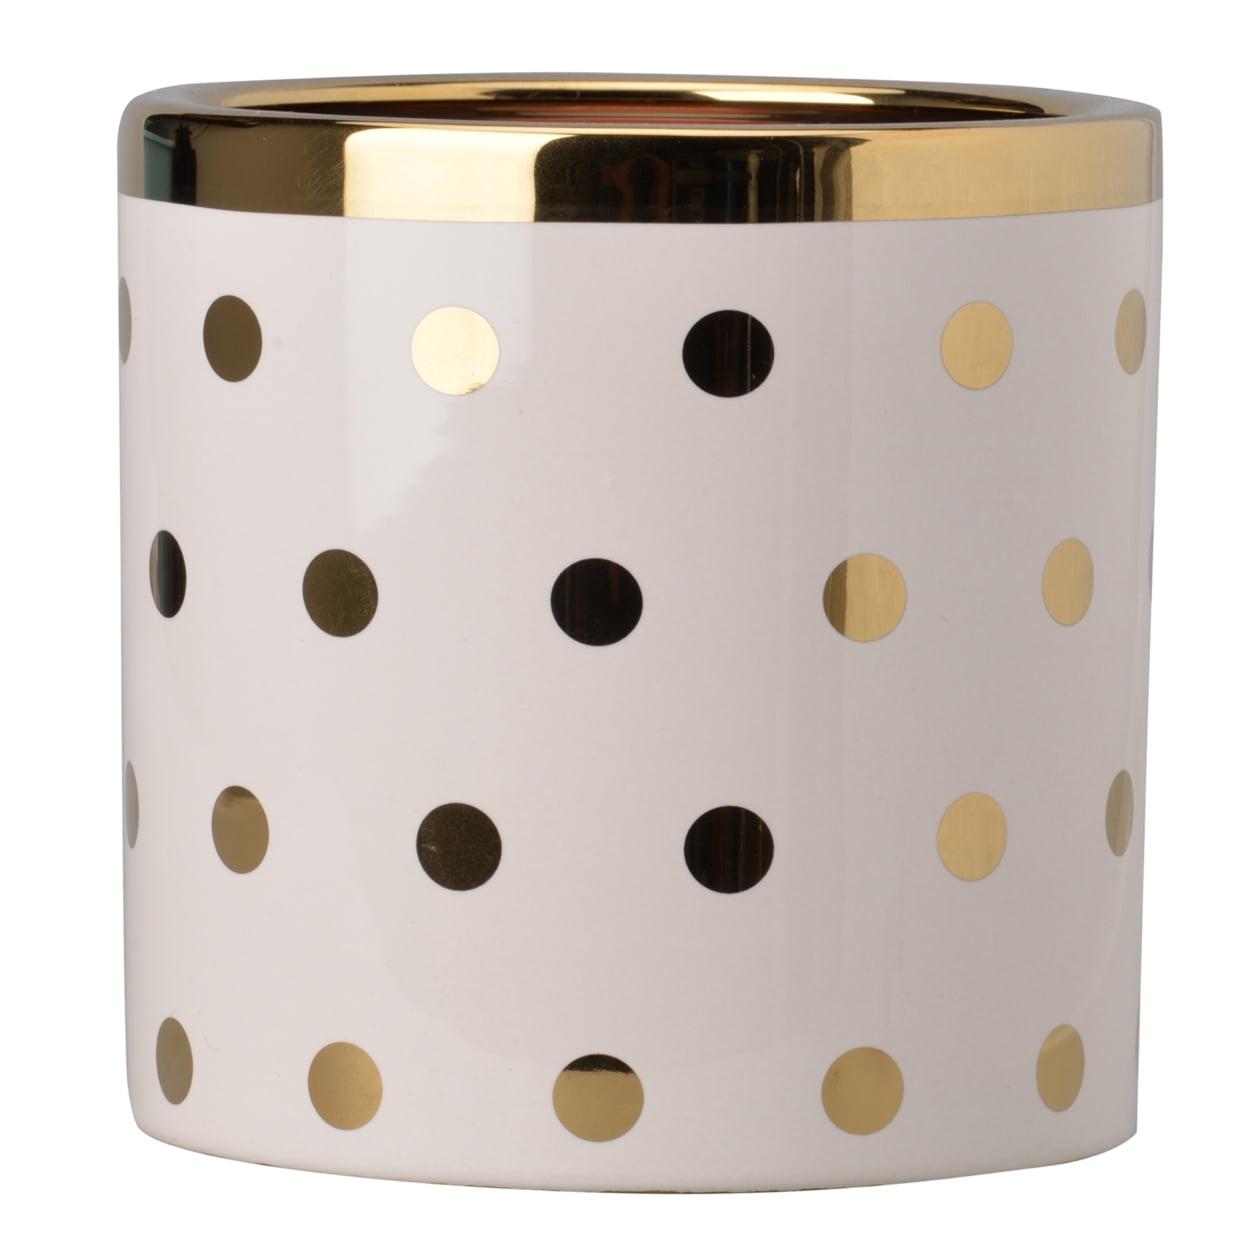 Ceramic Cylindrical White and Gold Polka Dot Tabletop Planter